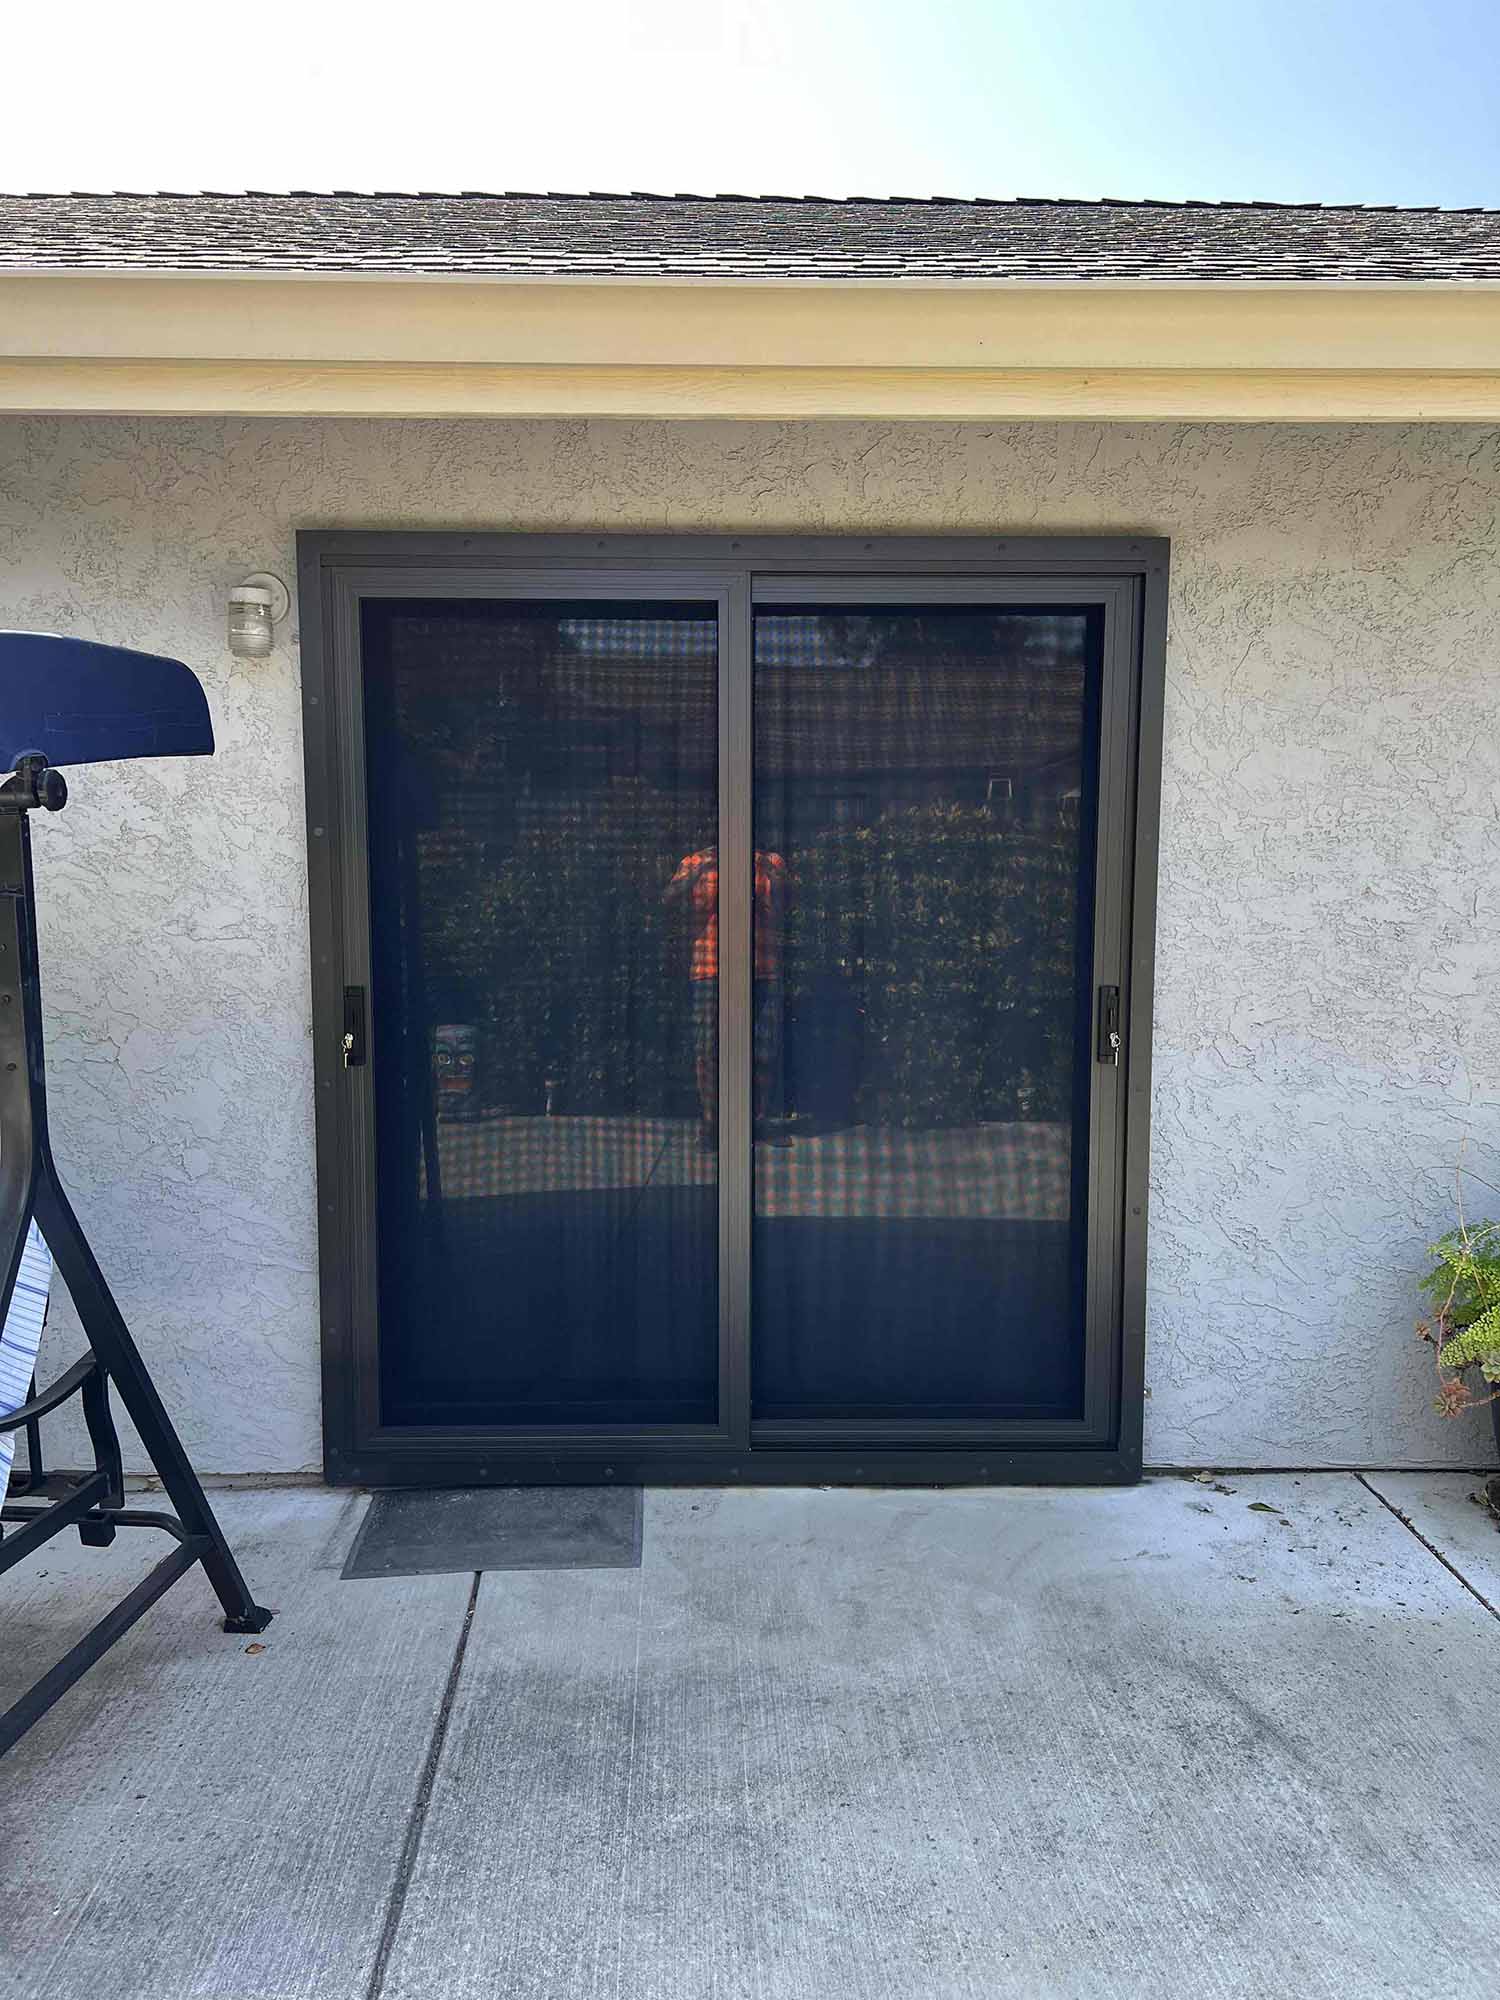 ClimatePro Installs Crimsafe Security Screens in American Canyon, CA